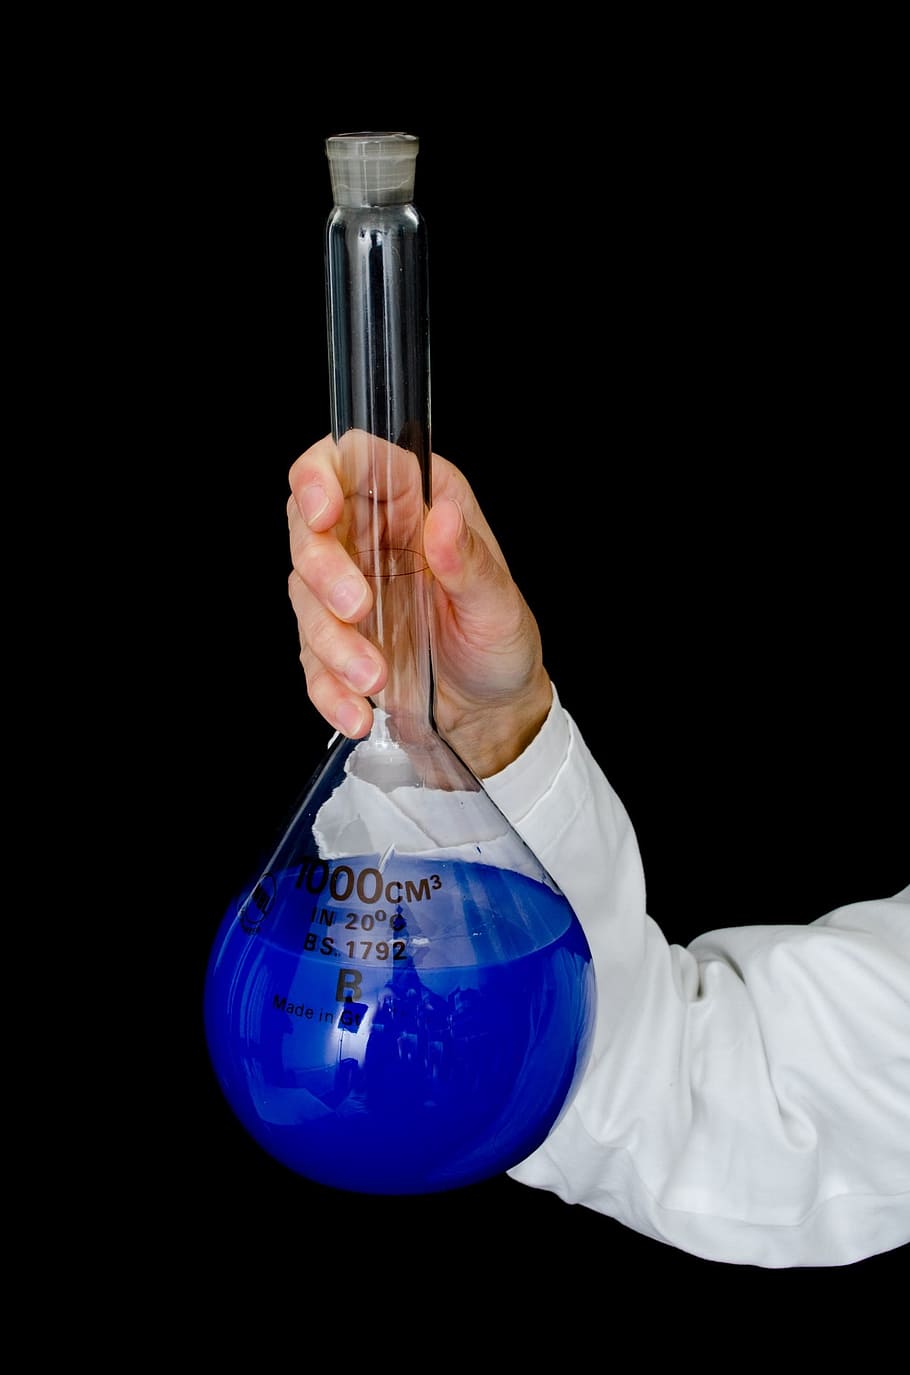 person holding filled clear glass tube, laboratory, liquid, blue